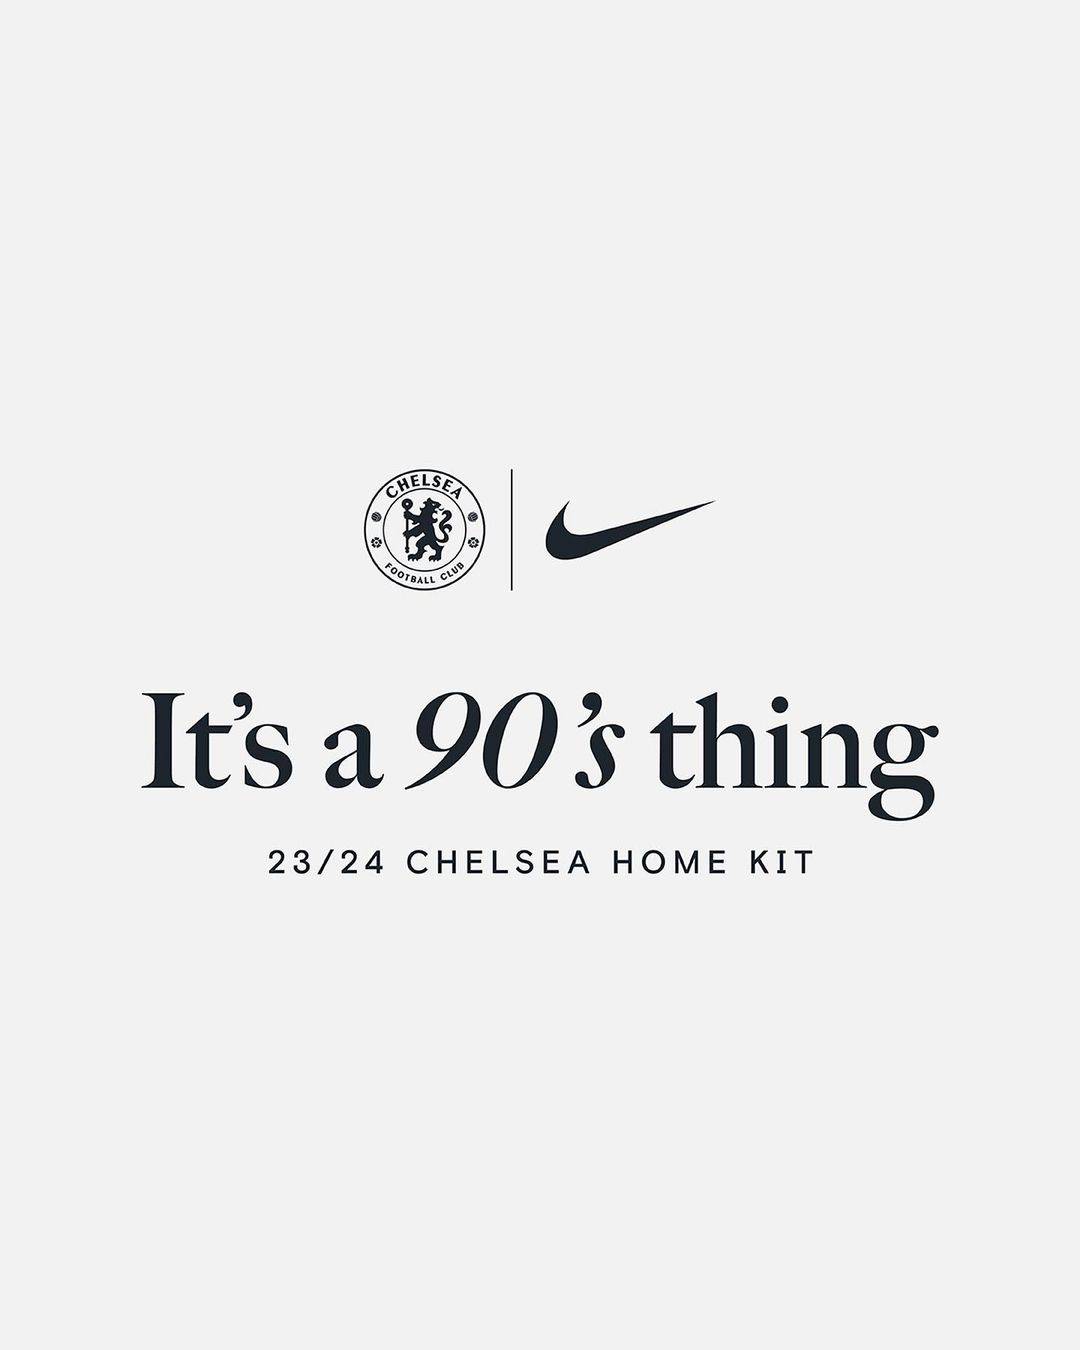 (Official) Chelsea Home Kit 2023/24 It's a 90's thing